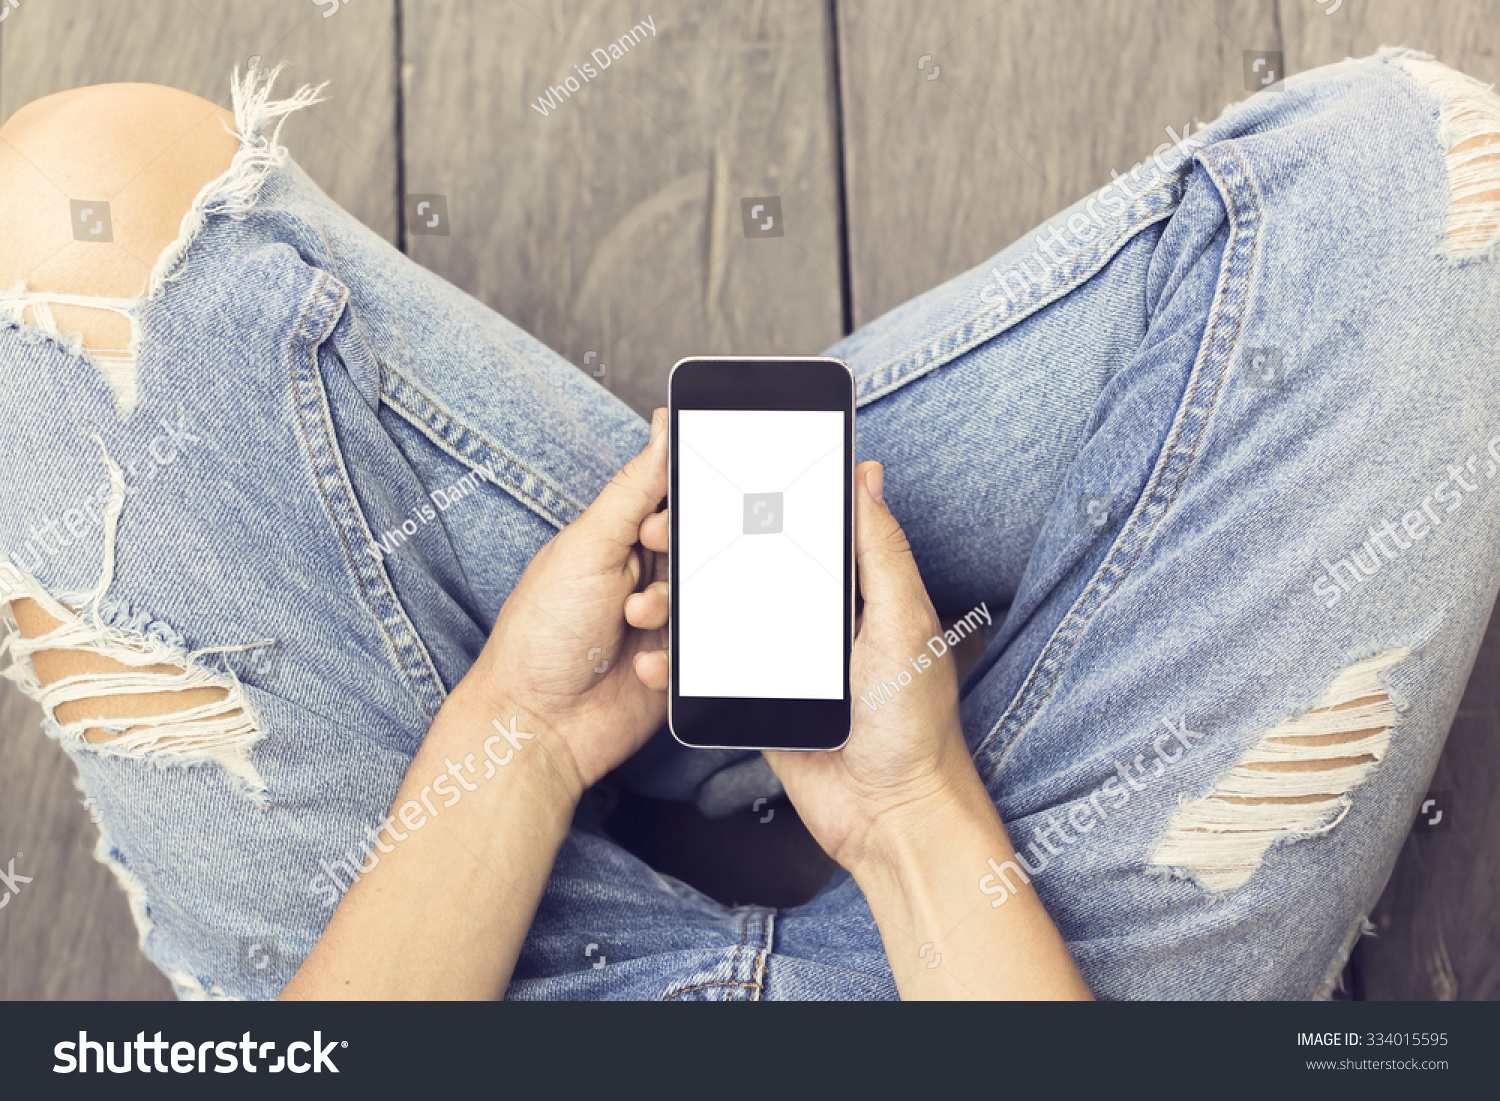 Girl in jeans with blank smartphone on the wooden floor, mock up #334015595